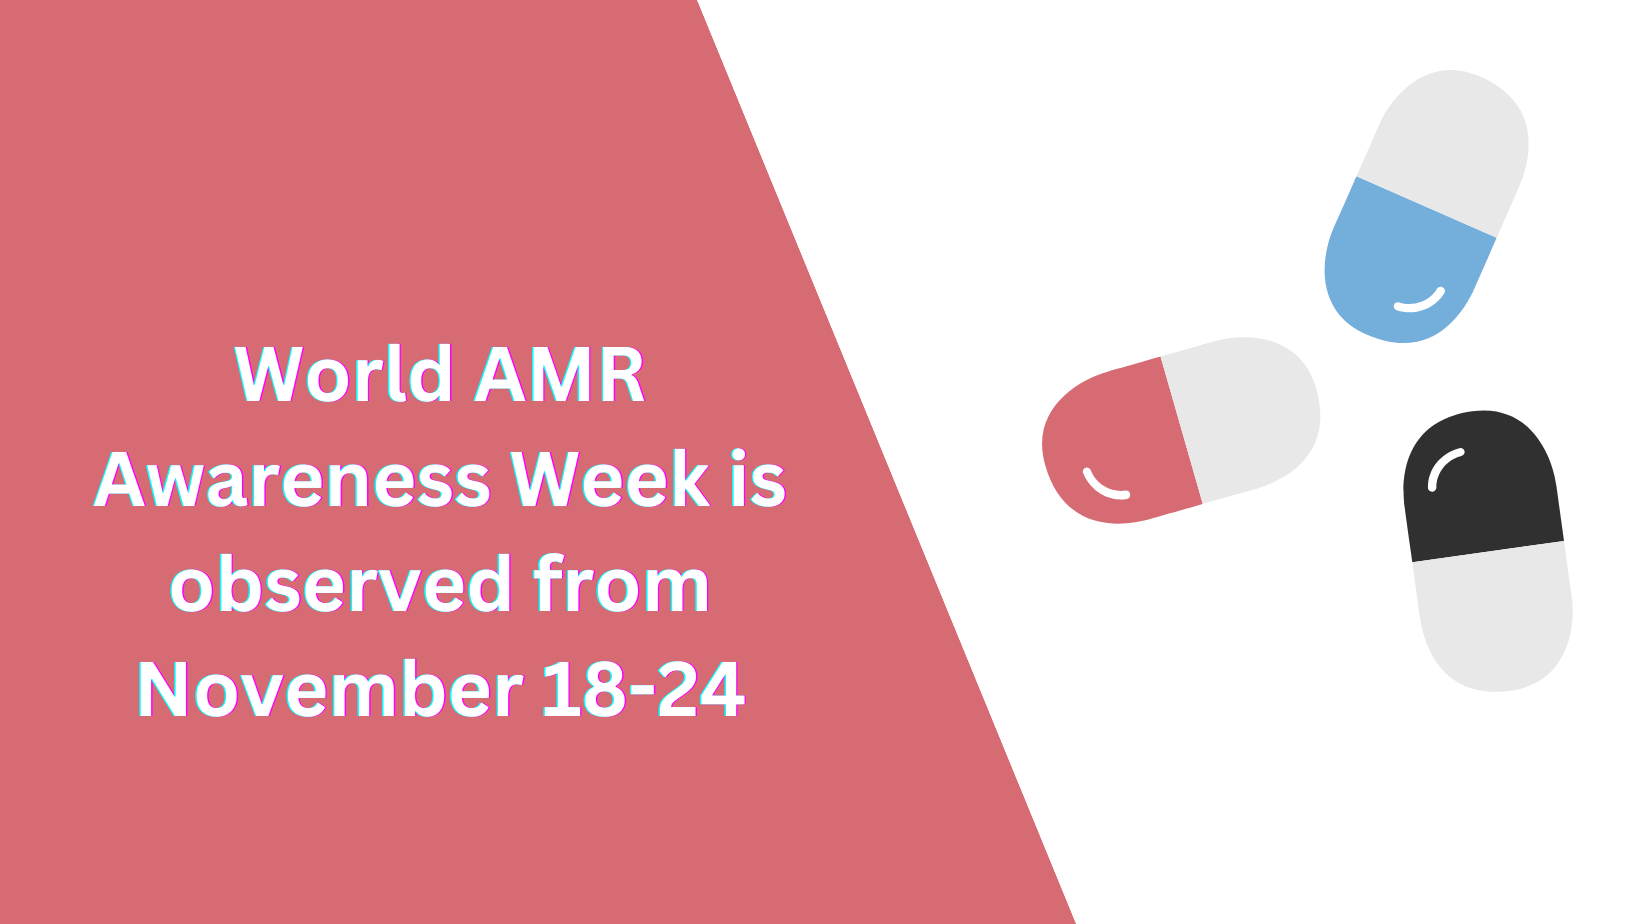 World AMR Awareness Week is observed from November 18-24